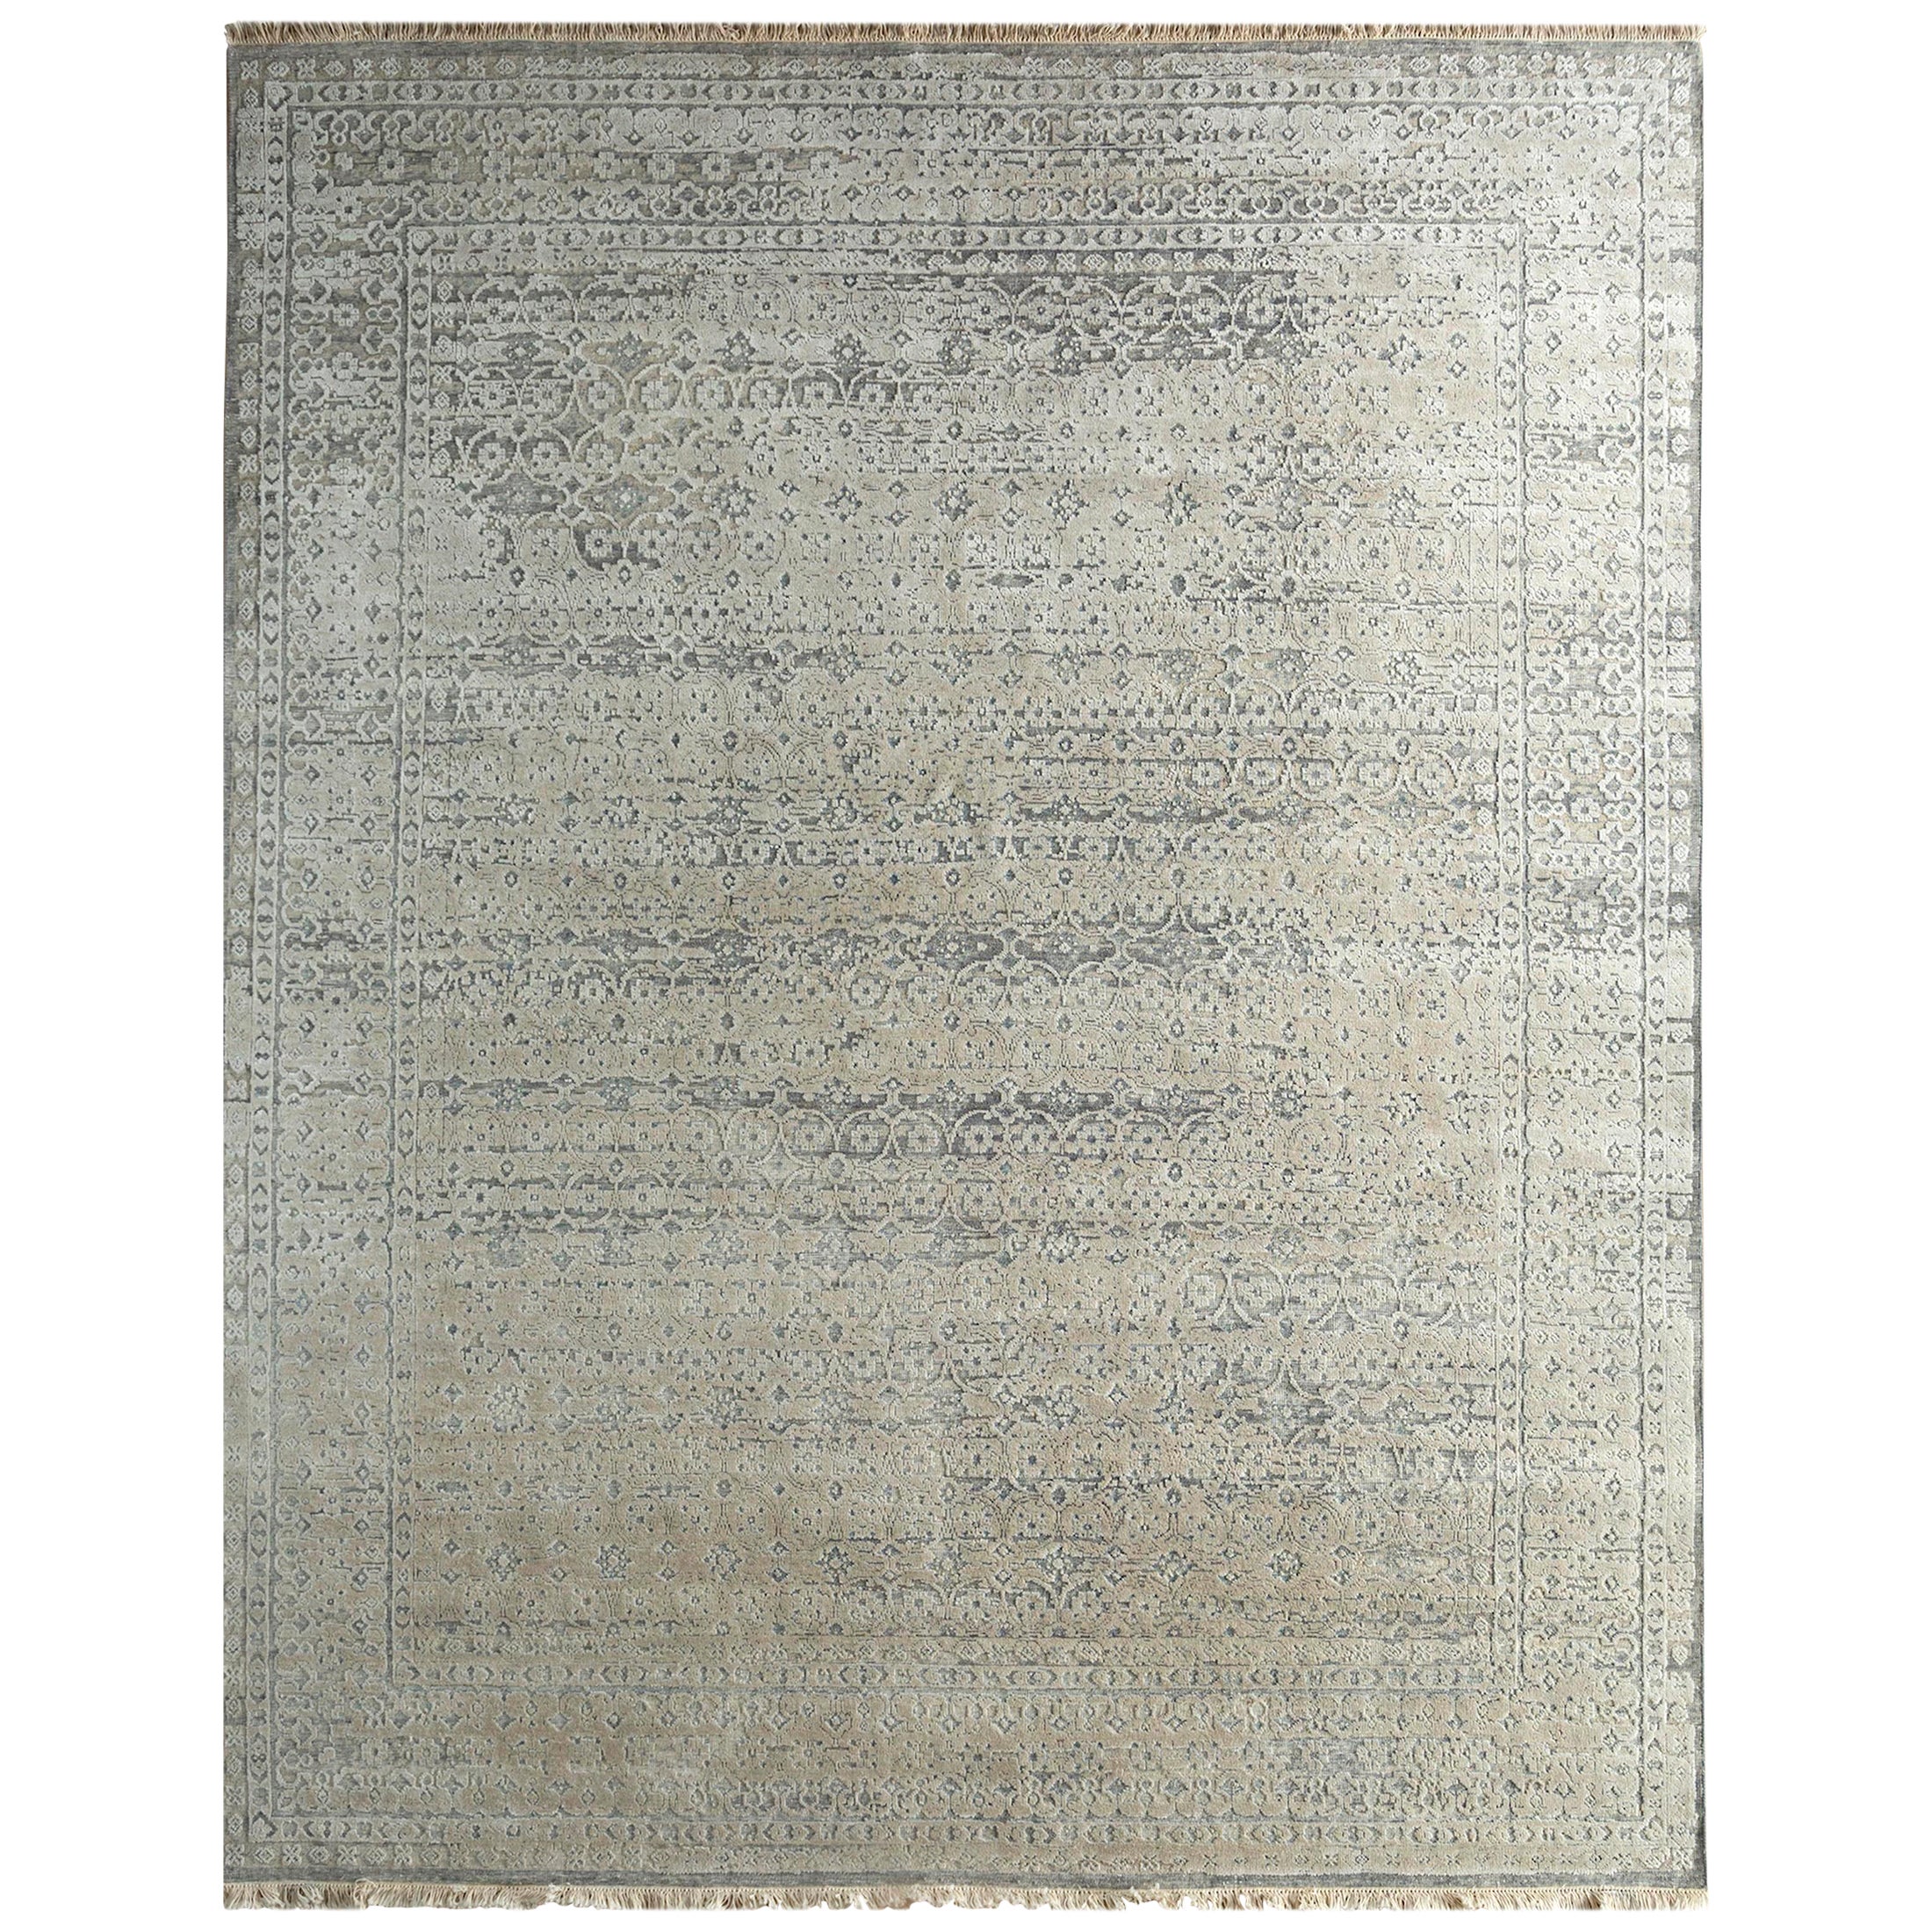 Serene Meadow Flax Charcoal Slate 180X270 cm Handknotted Rug For Sale